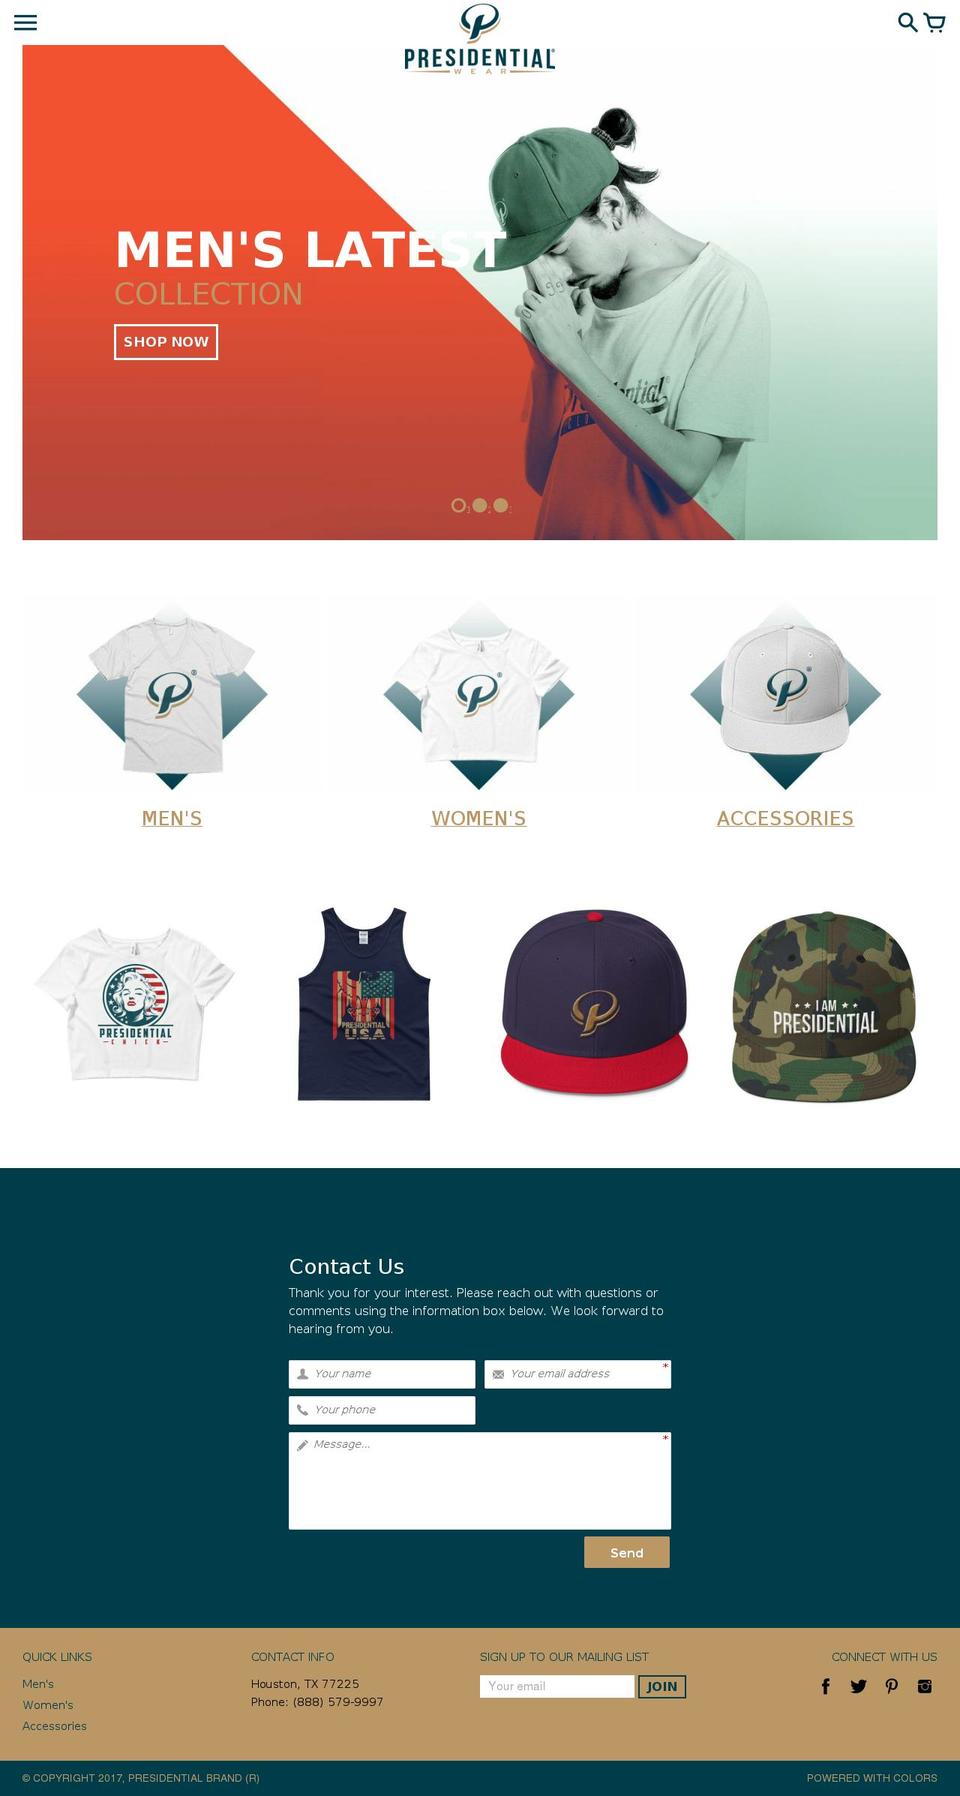 Colors Shopify theme site example buypresidentialshirts.com